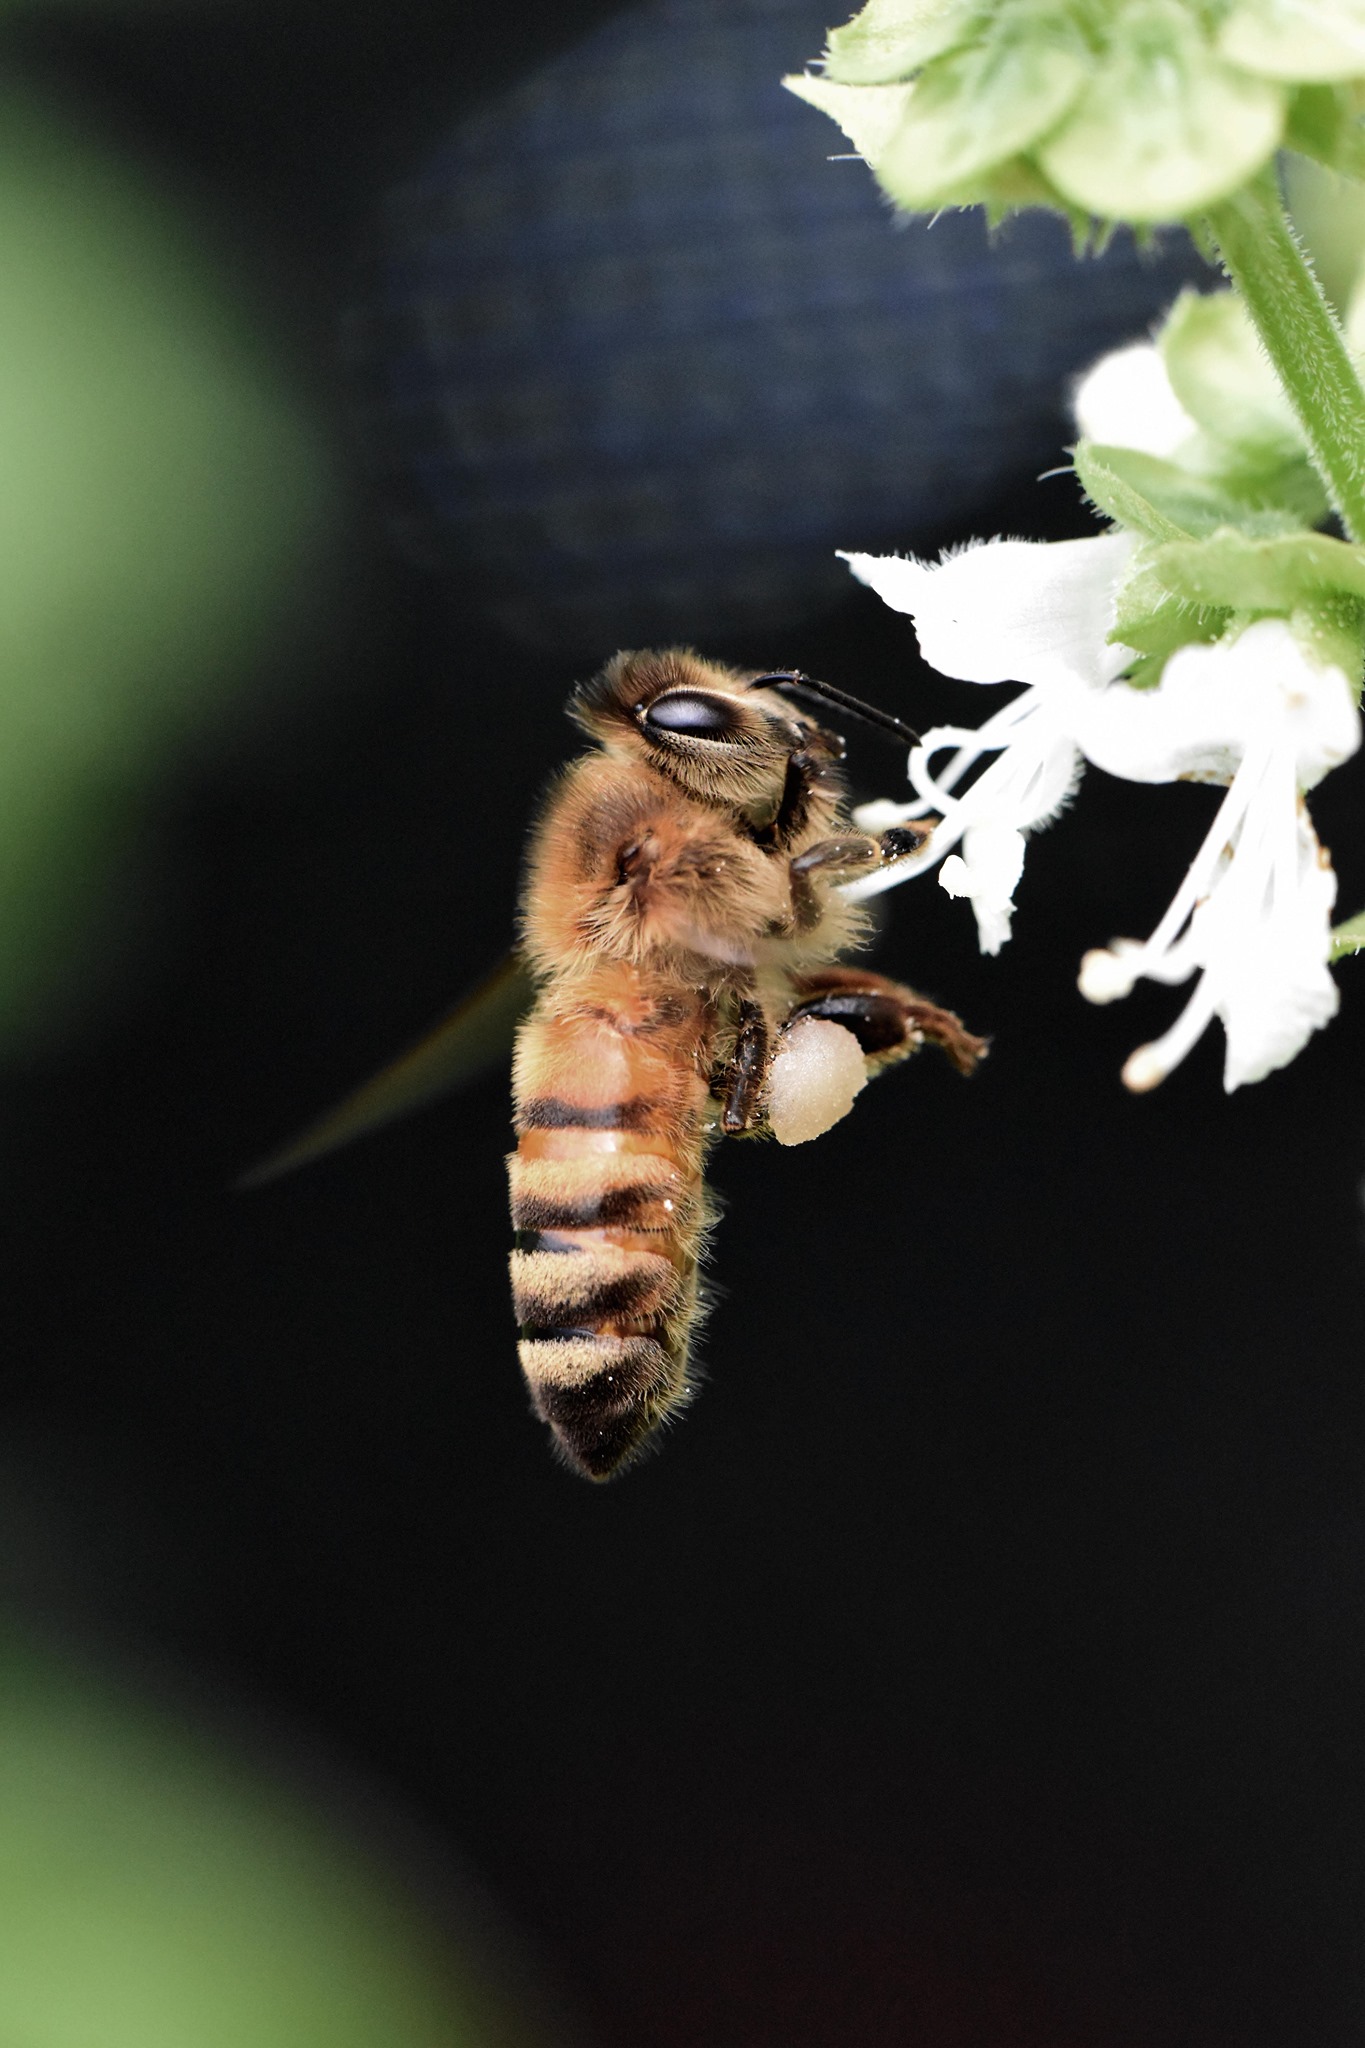 Close up image of a honeybee hovering at the stamen of a white flower